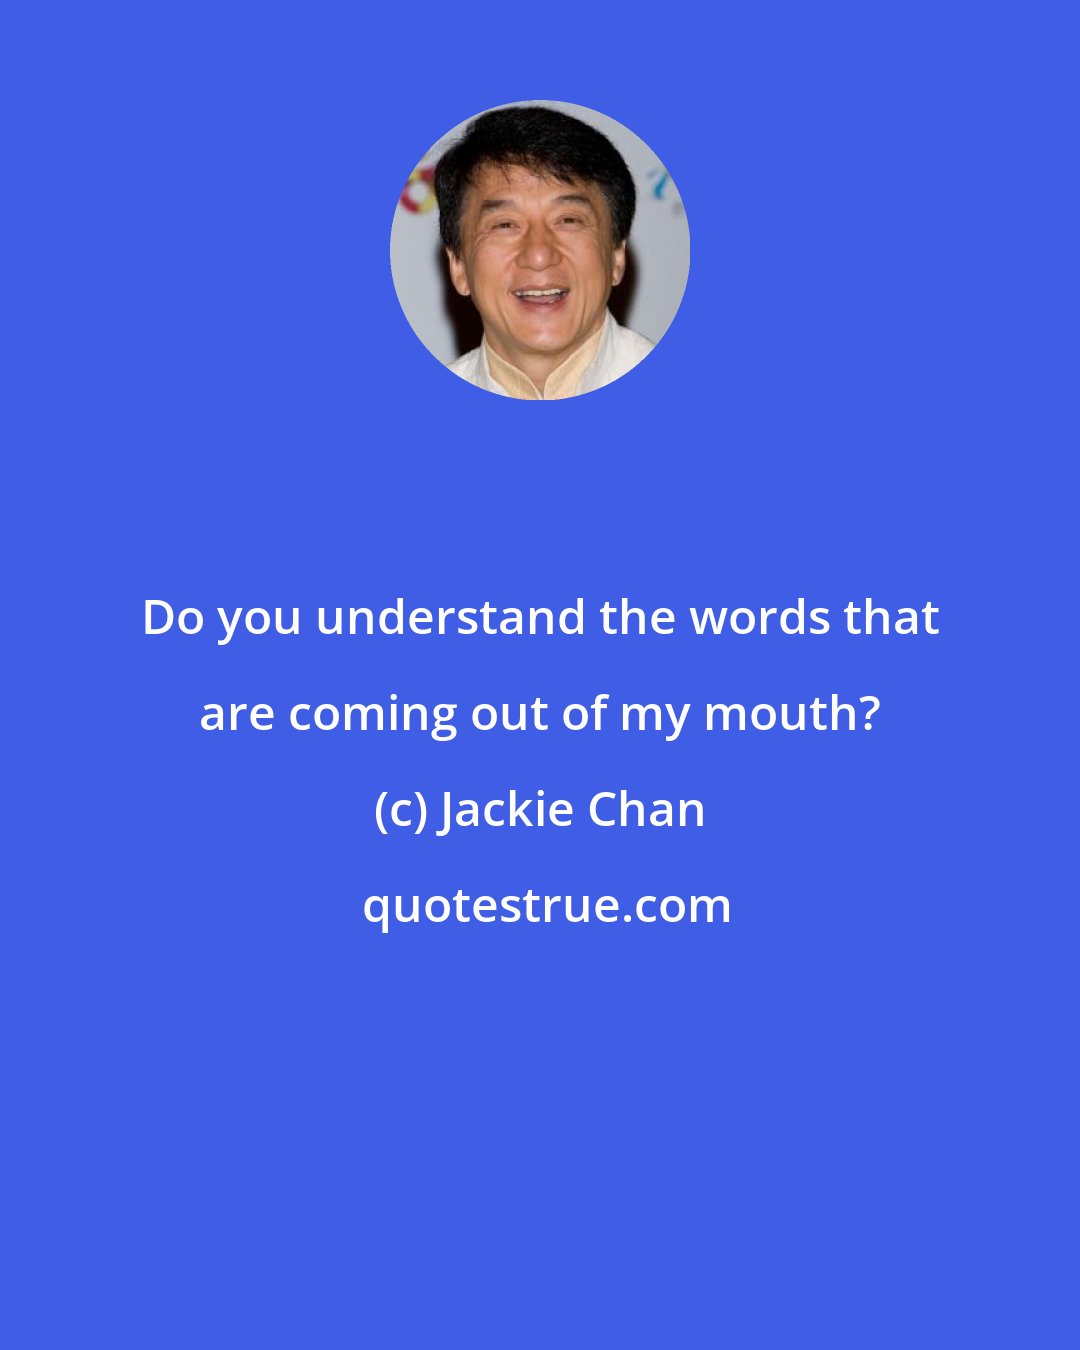 Jackie Chan: Do you understand the words that are coming out of my mouth?